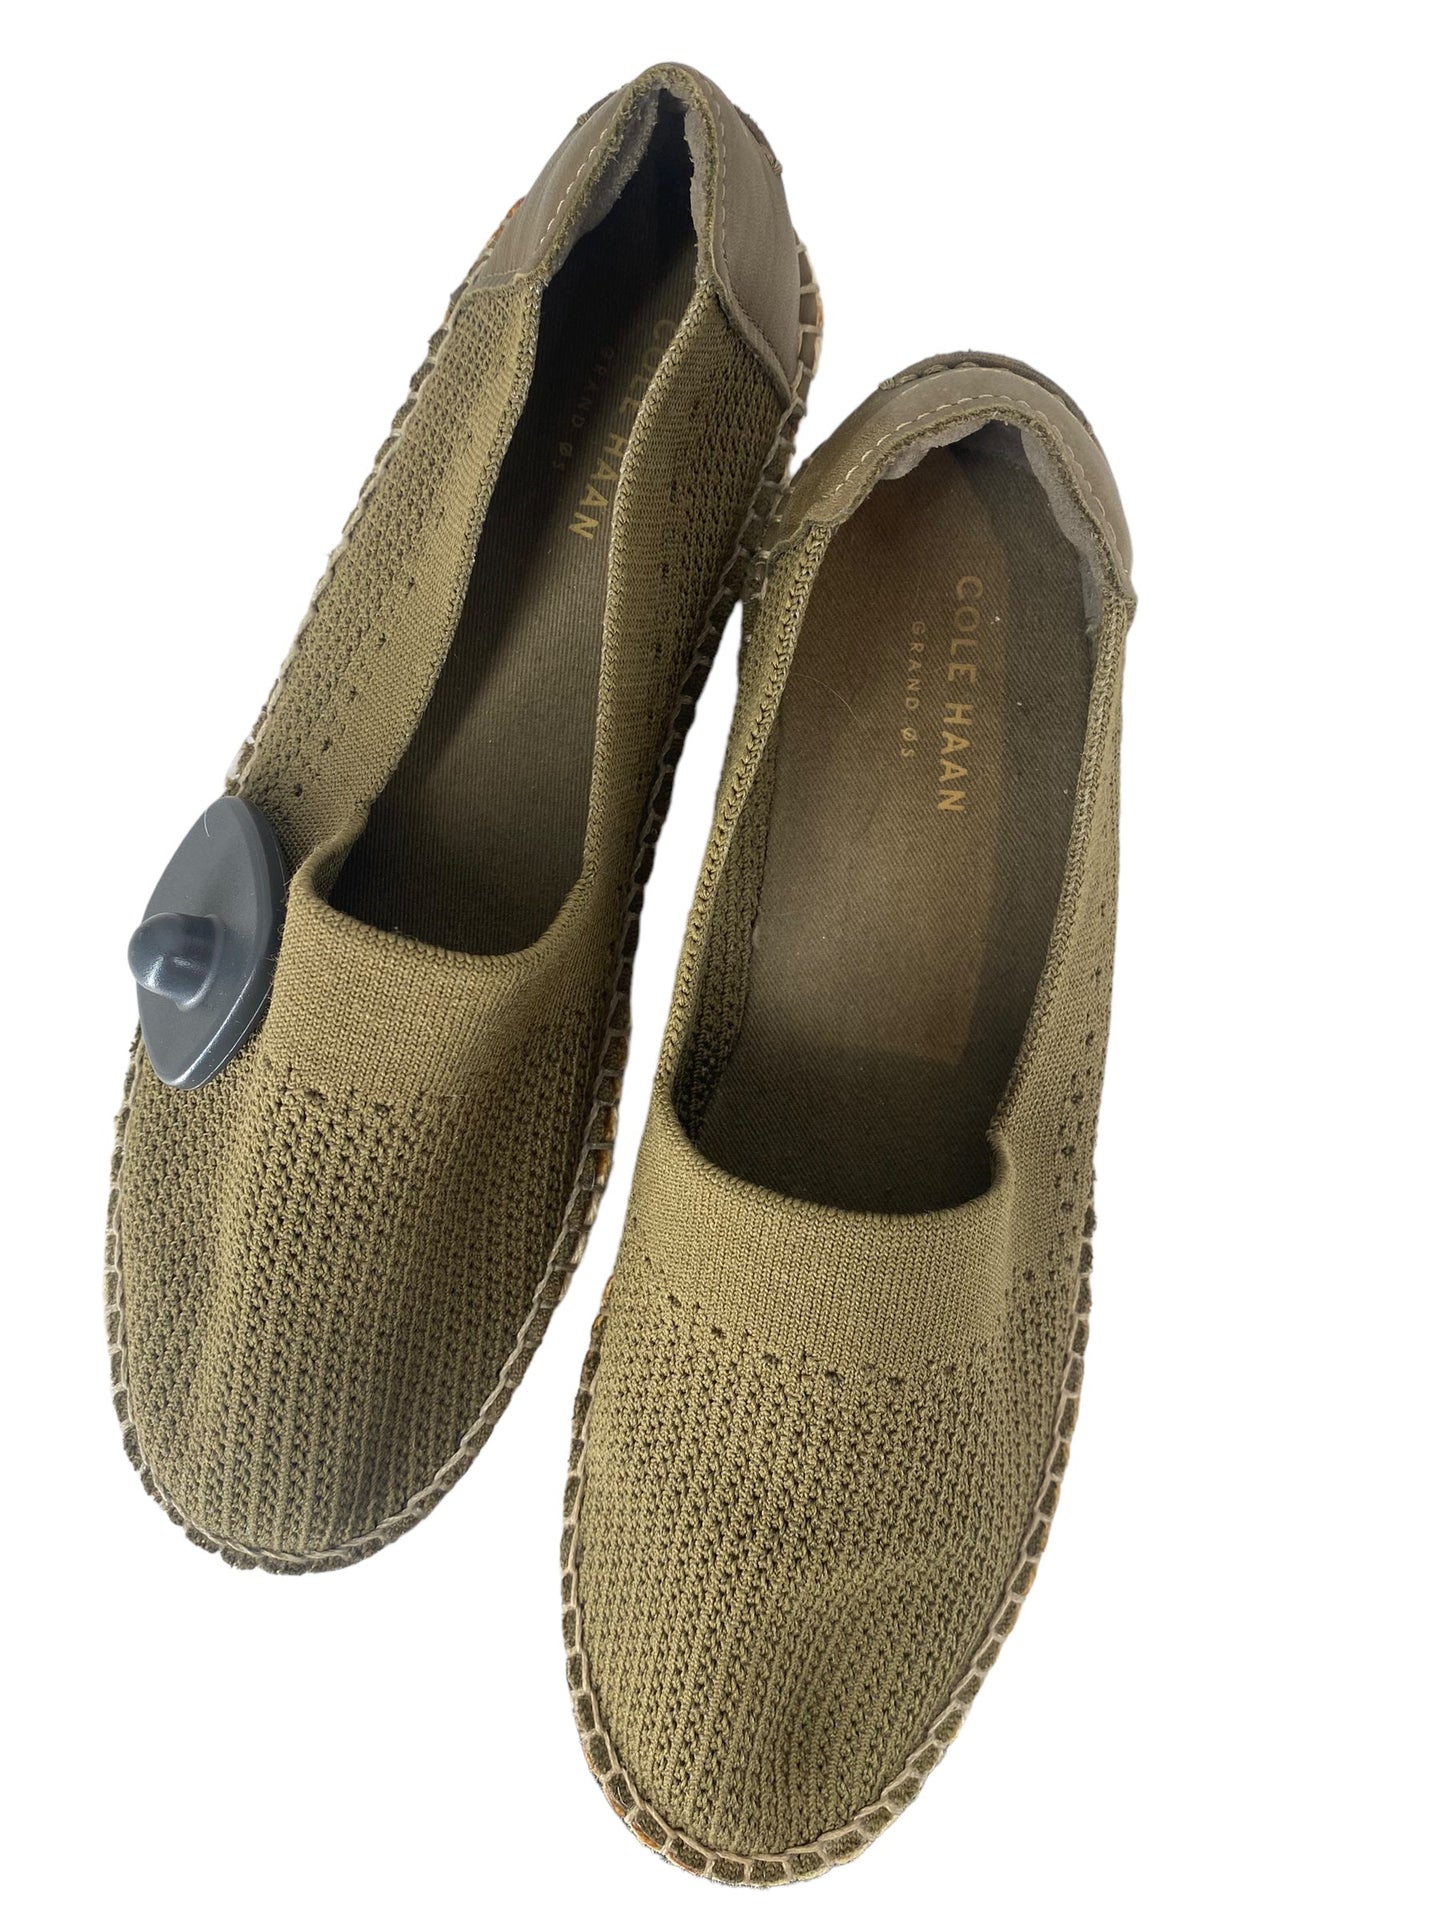 Green Shoes Flats Cole-haan, Size 8.5